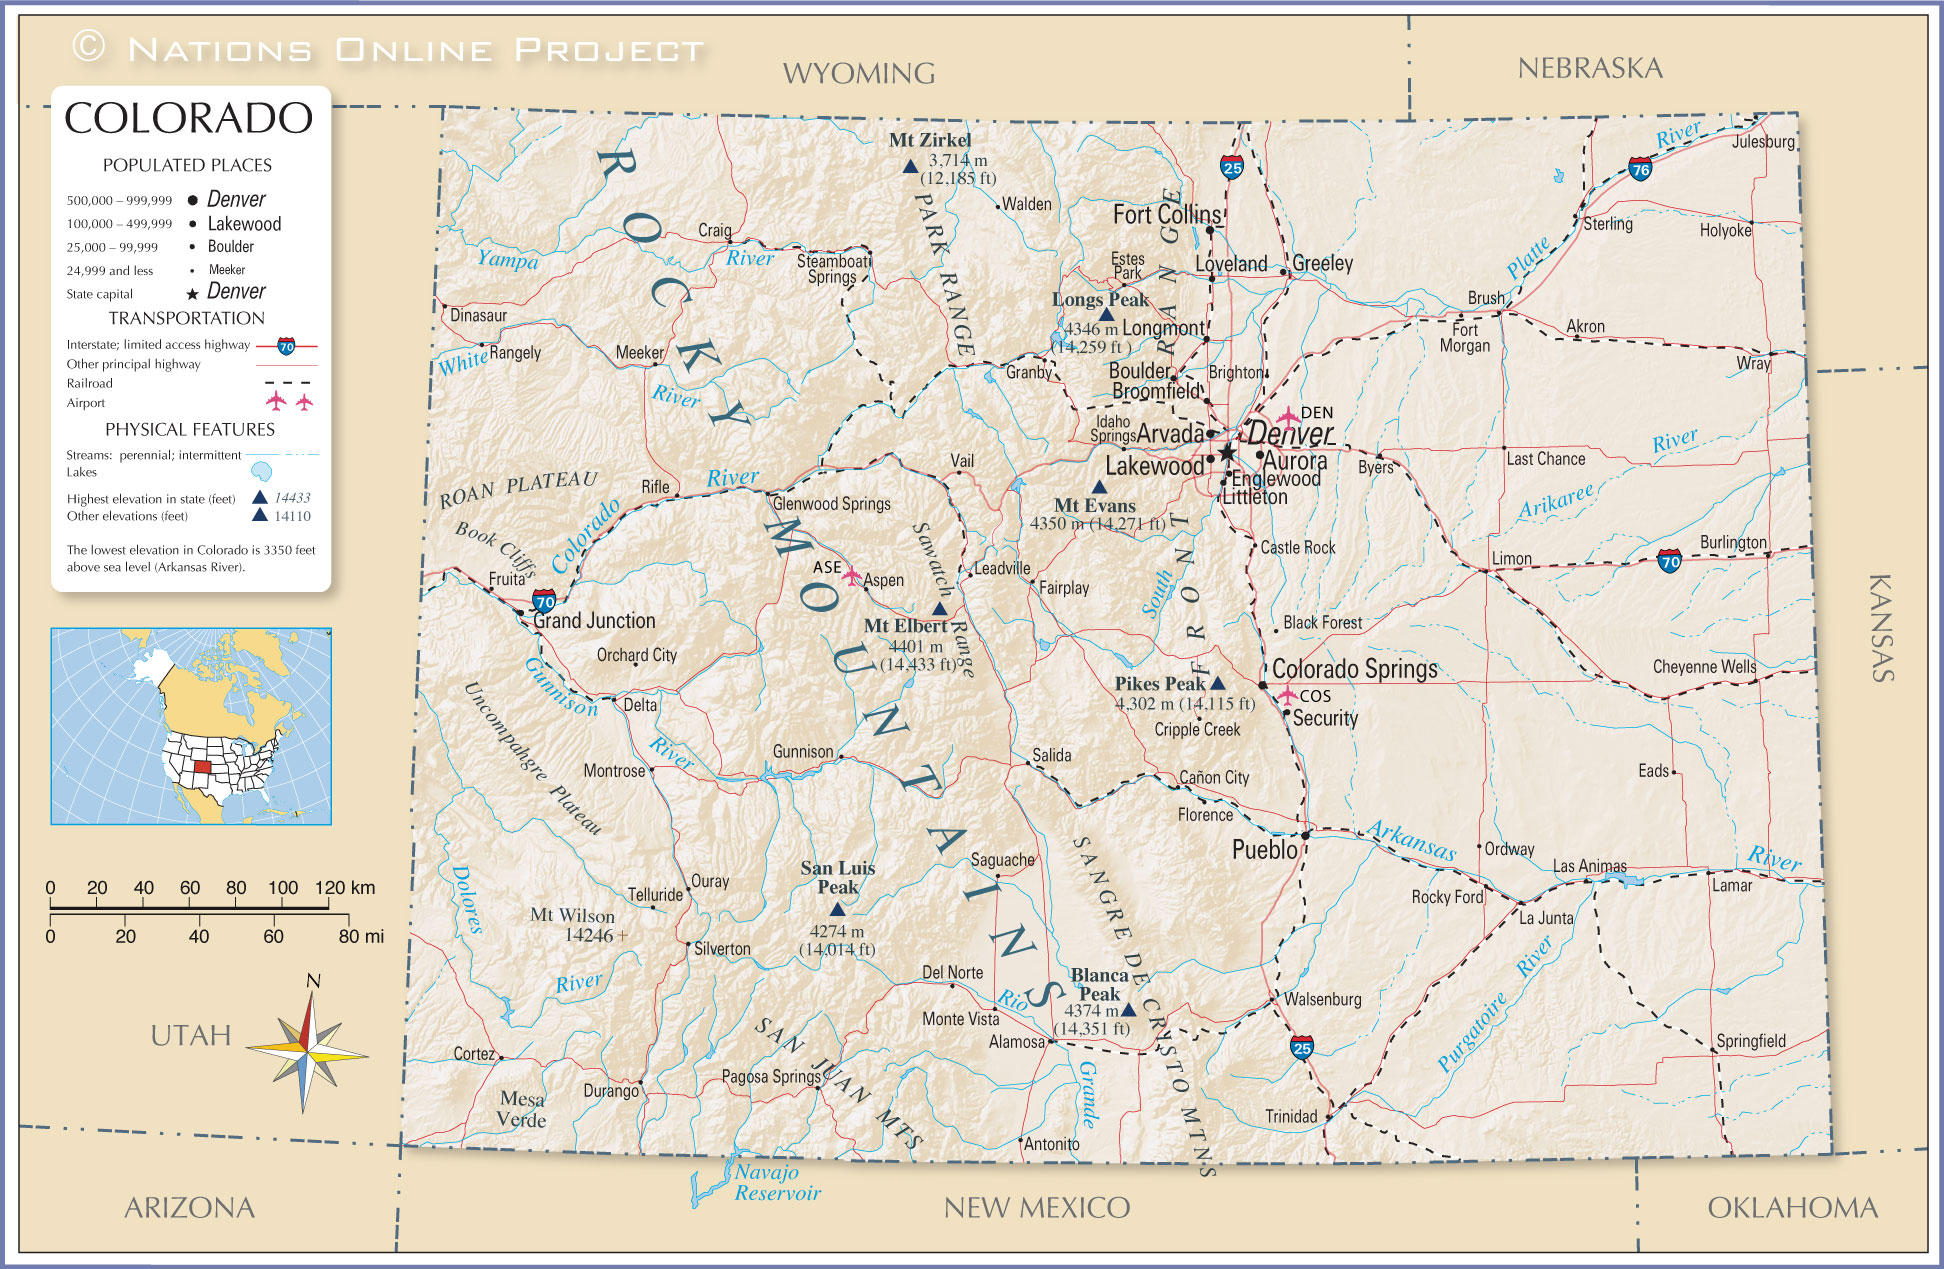 Show Map Of Colorado Map of the State of Colorado, USA   Nations Online Project